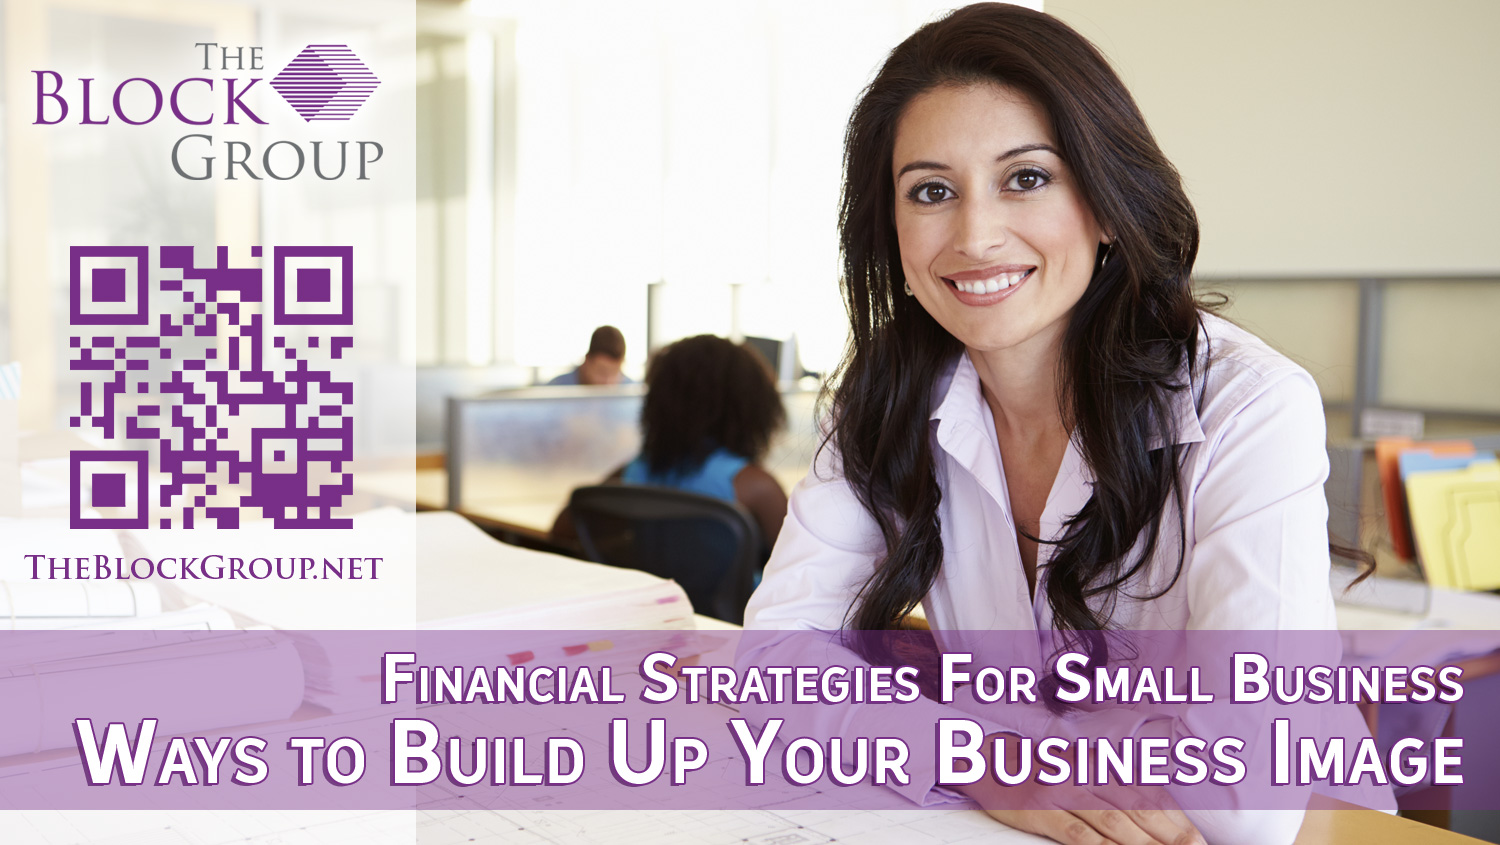 17-Financial-strategies-for-small-business